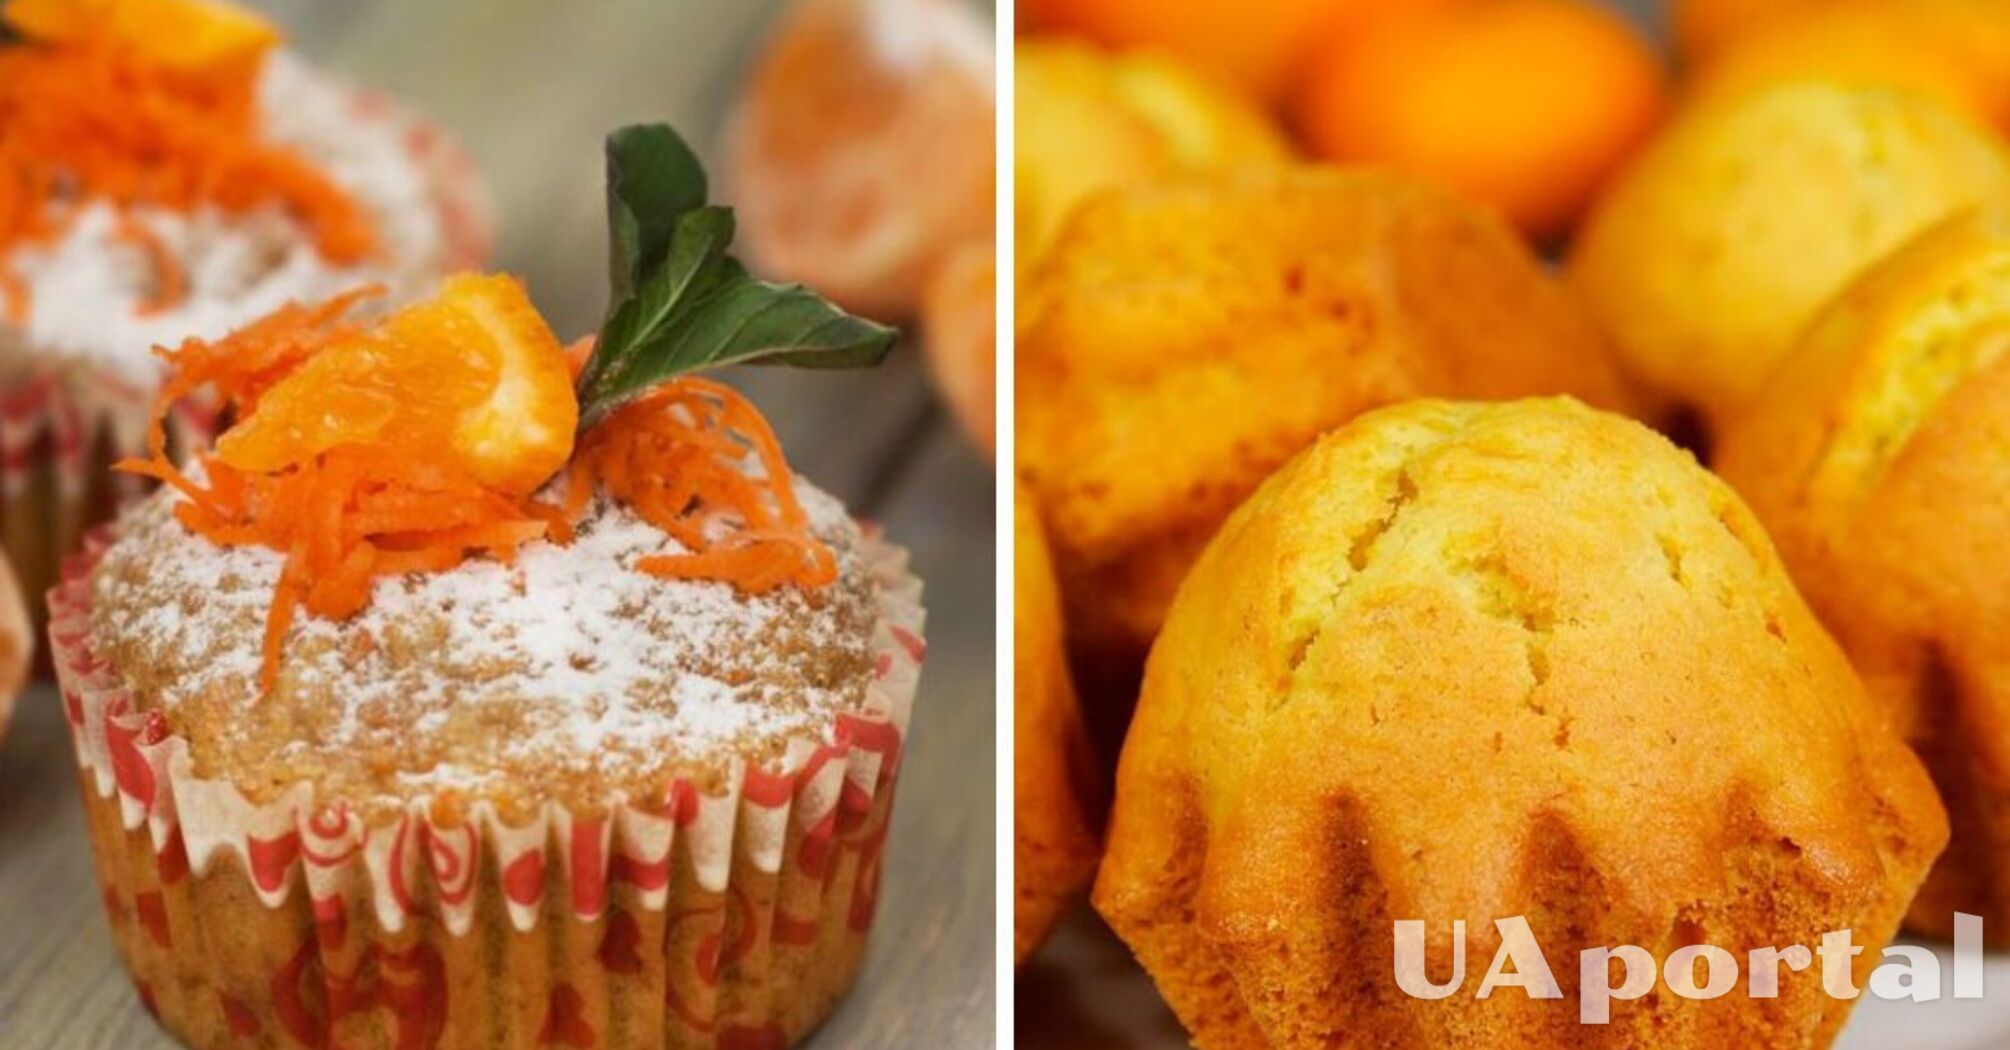 How to make tangerine muffins quickly and easily